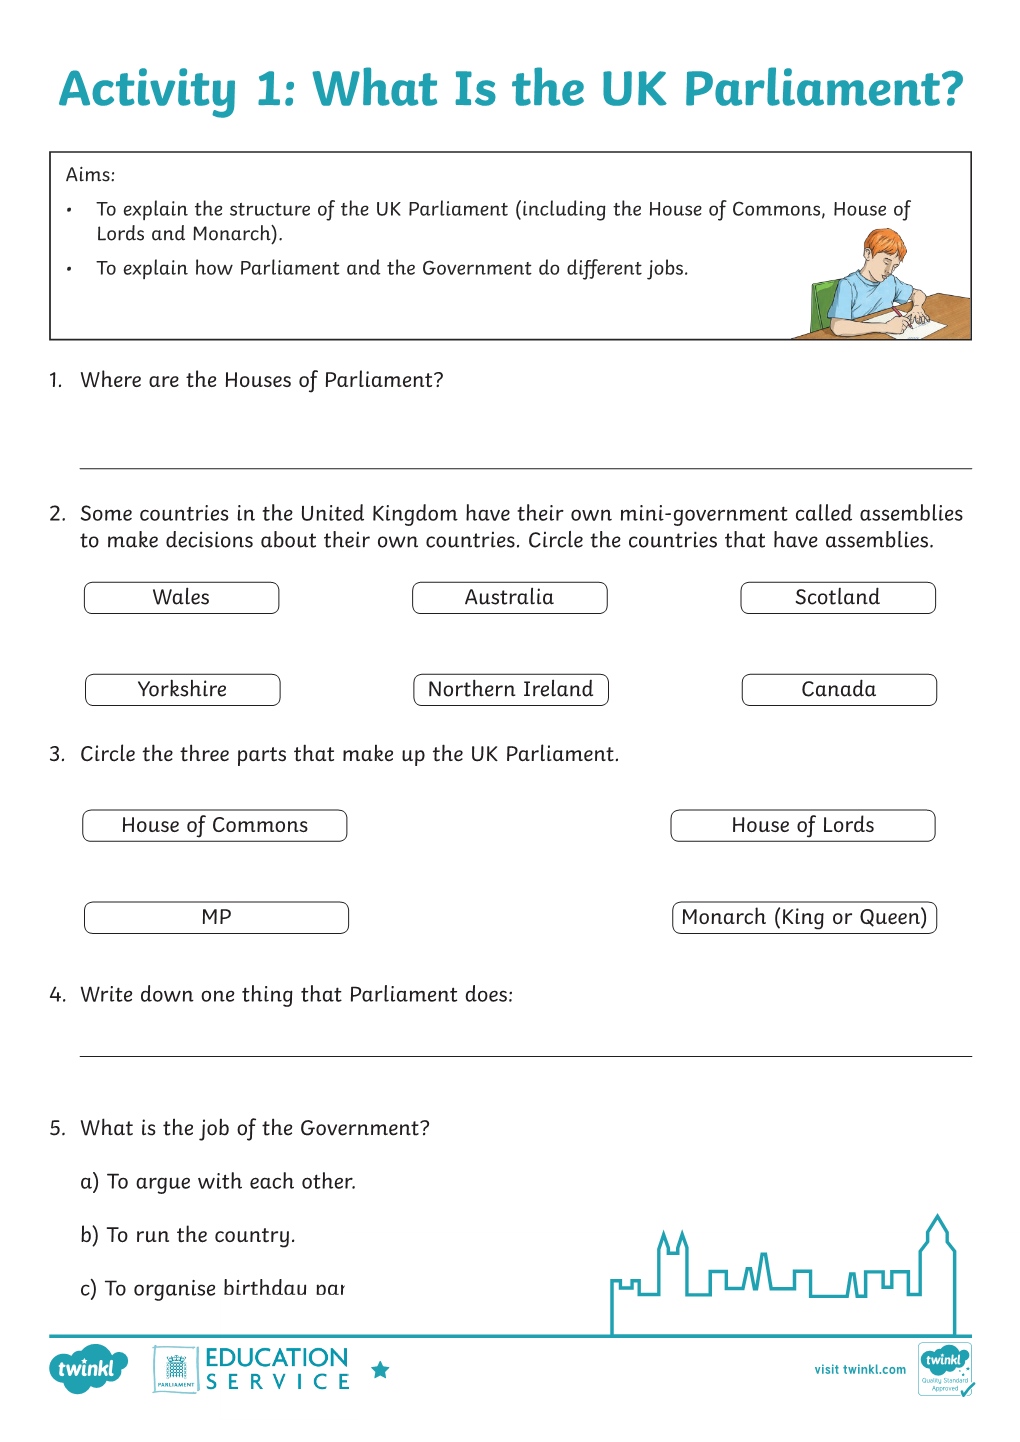 Activity 1: What Is the UK Parliament?